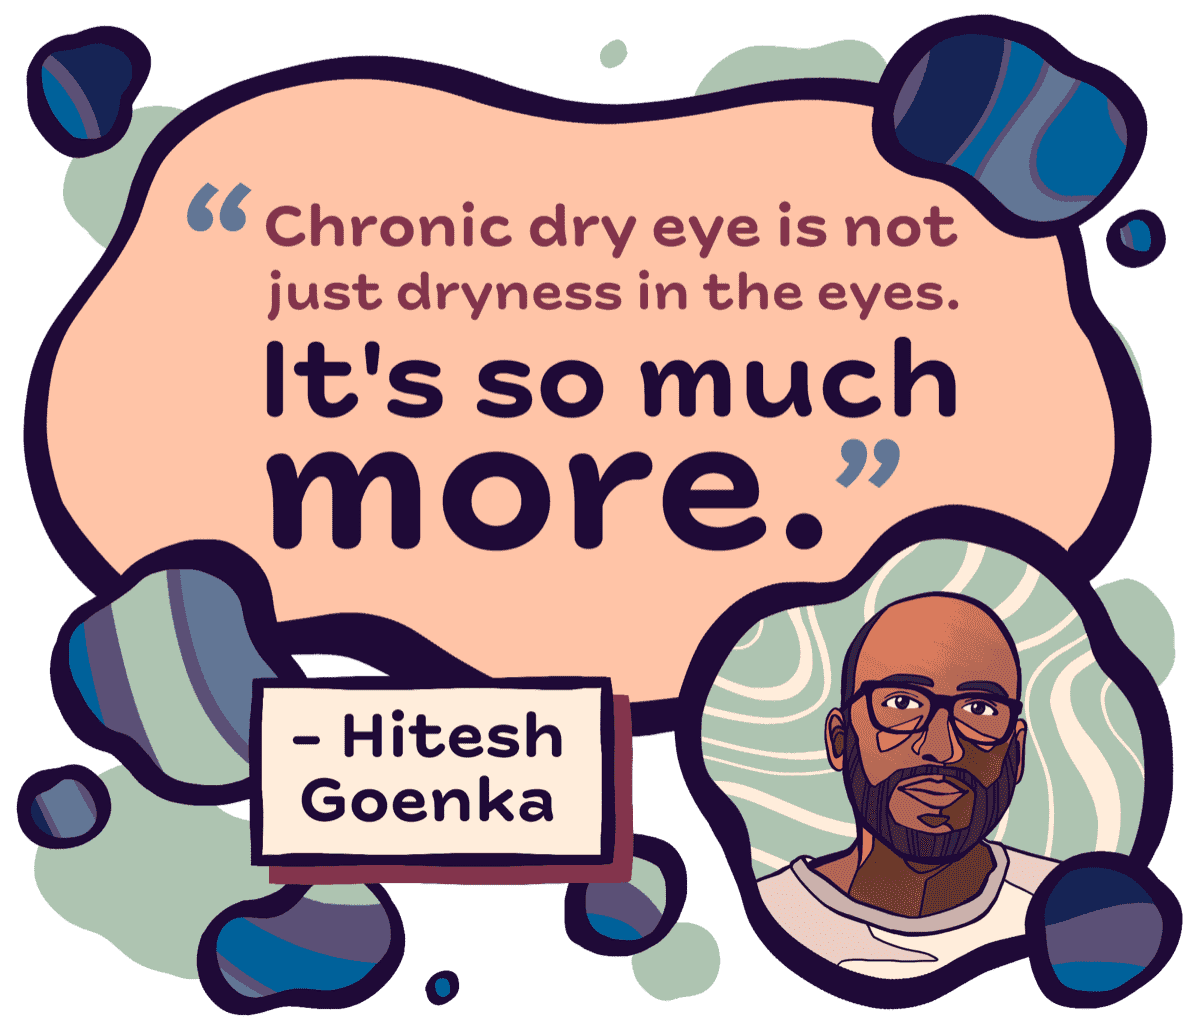 “Chronic dry eye is not just dryness in the eyes. It's so much more.